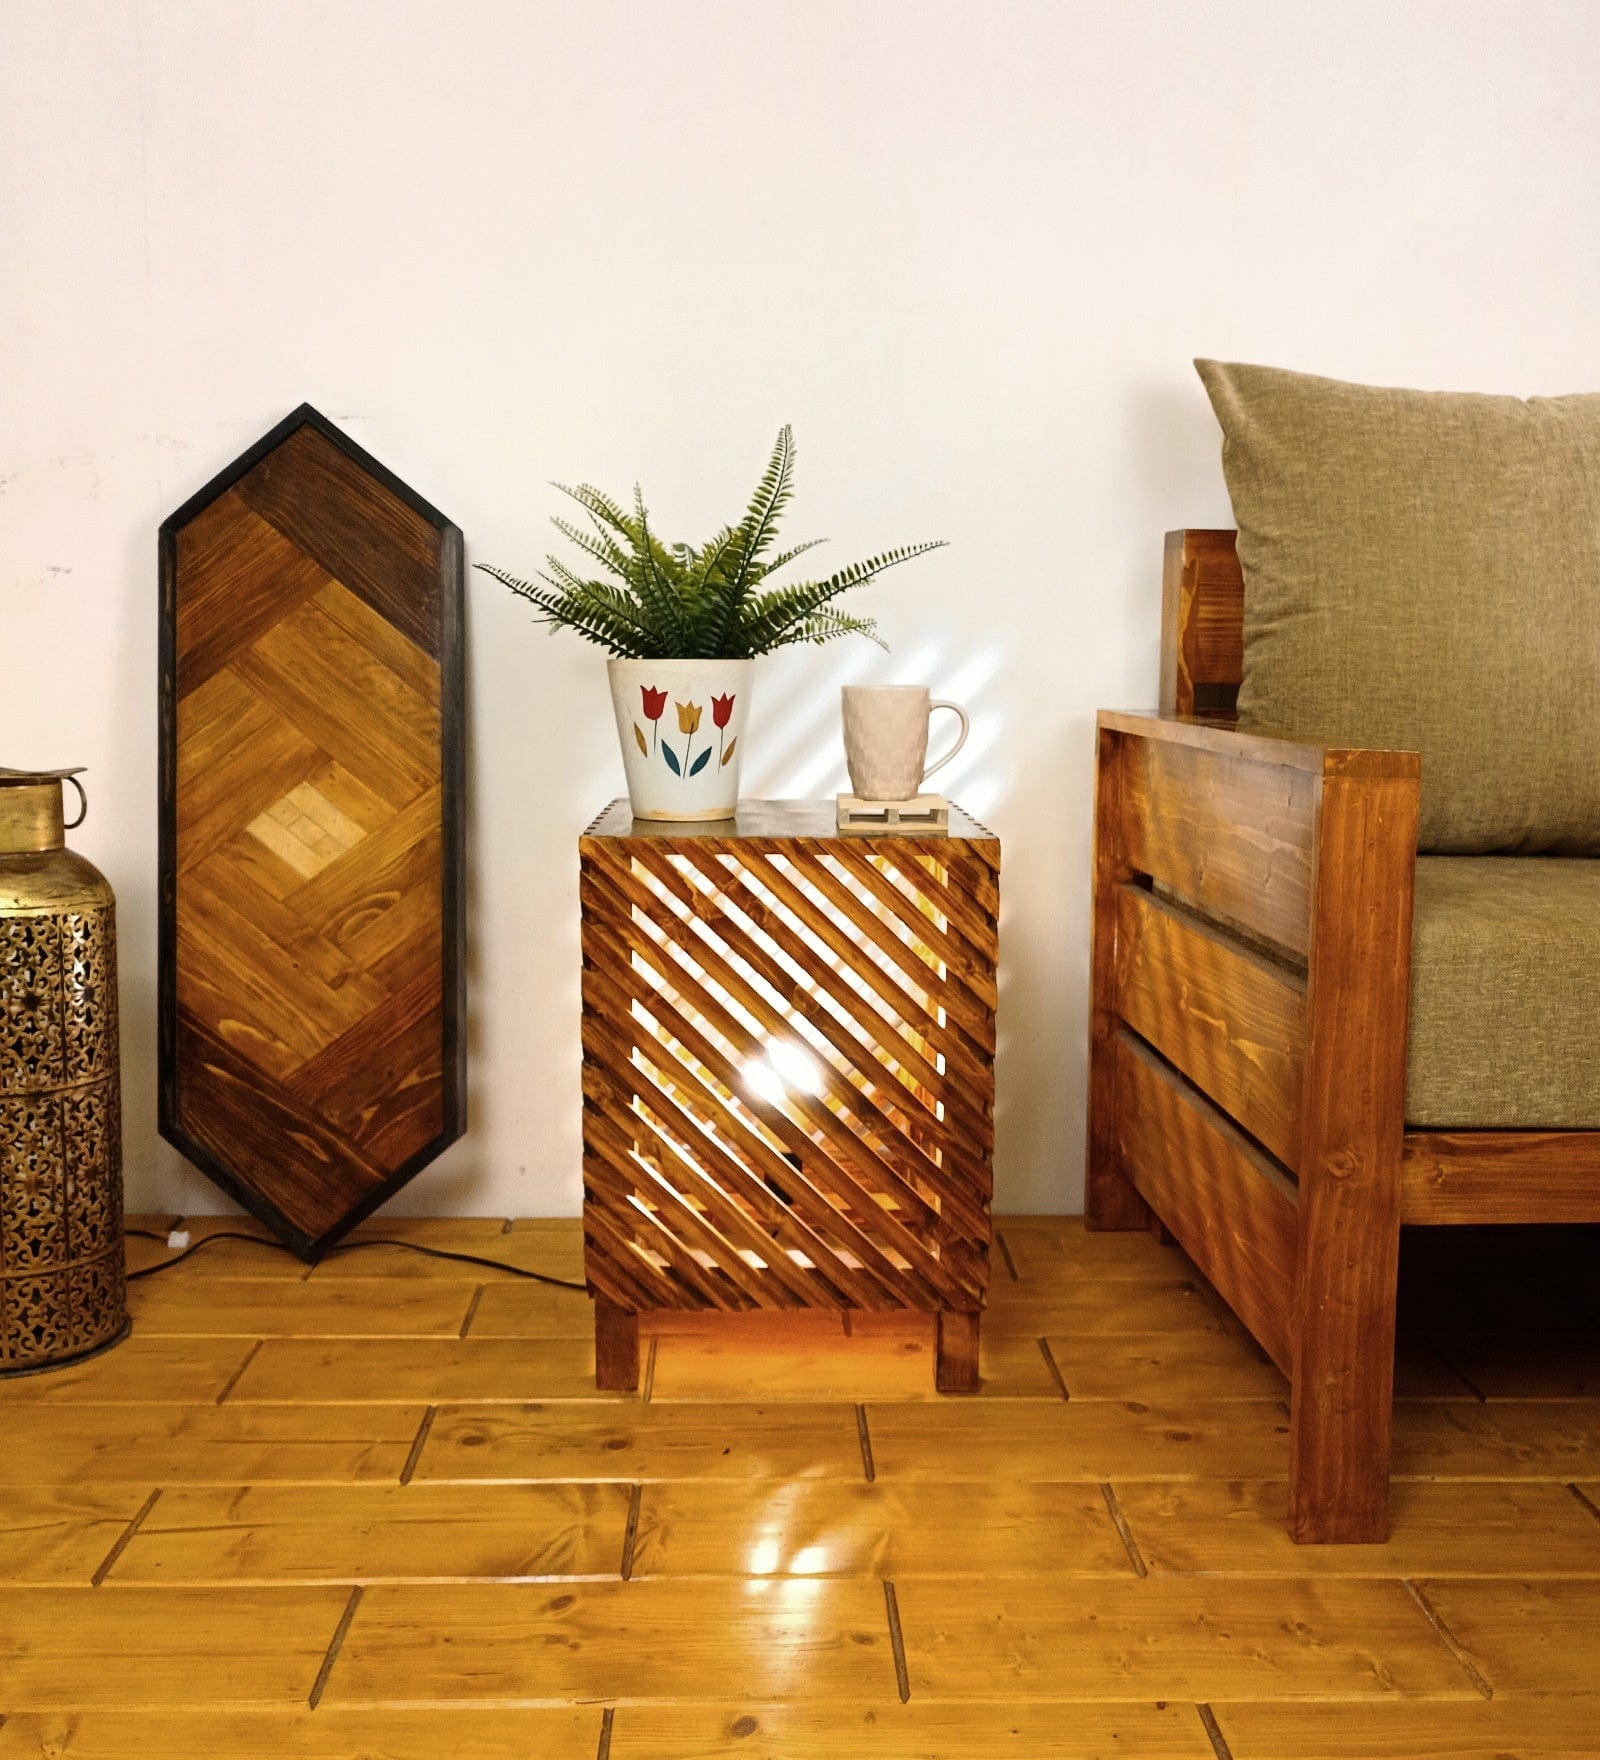 Serge Wooden Floor Lamp with Brown Base and Jute Fabric Lampshade (BULB NOT INCLUDED)